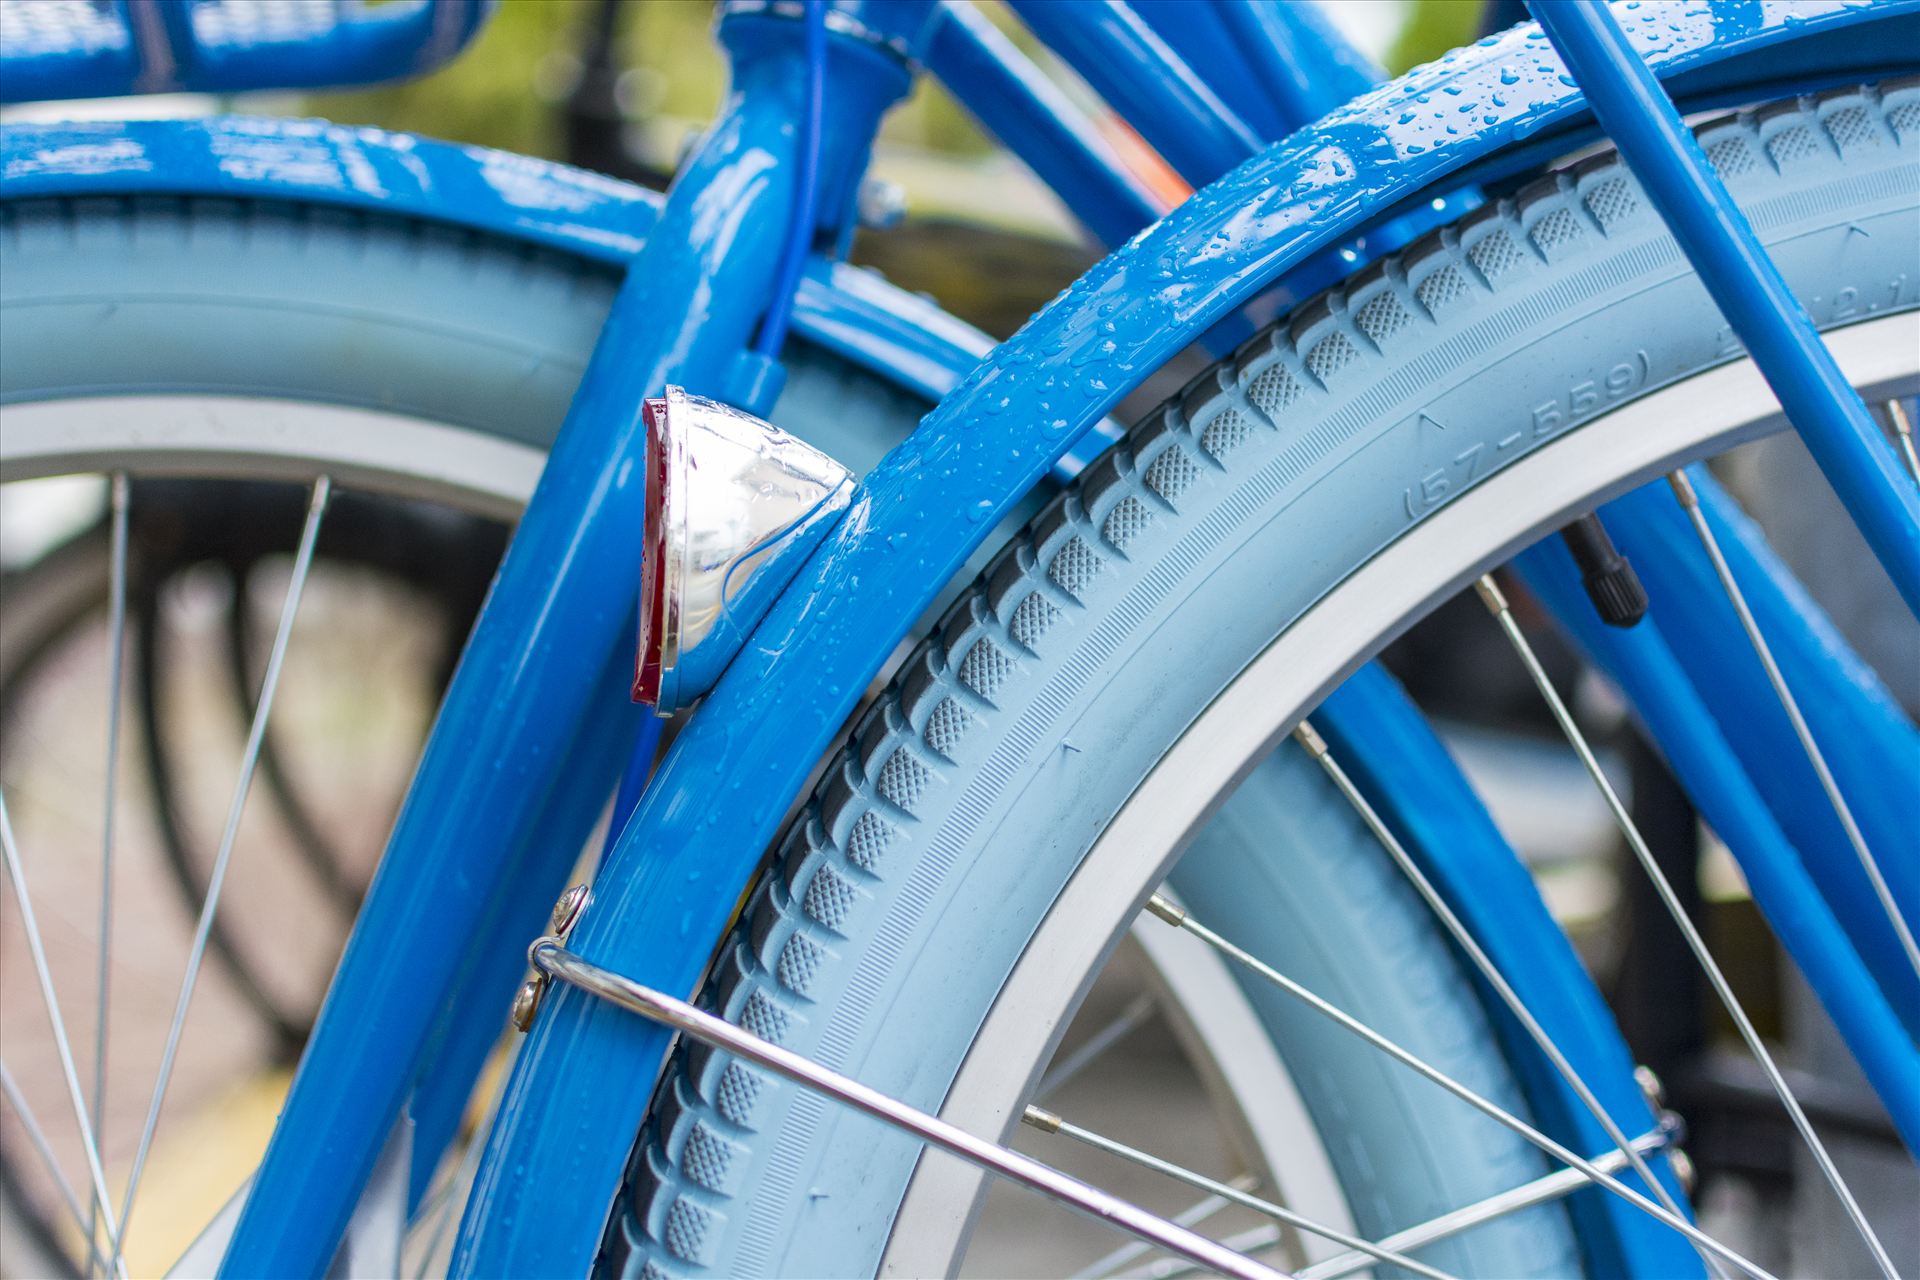 Rainy Blue Bike.jpg Rain slicked blue bicycle and a Key West morning by Sarah Williams